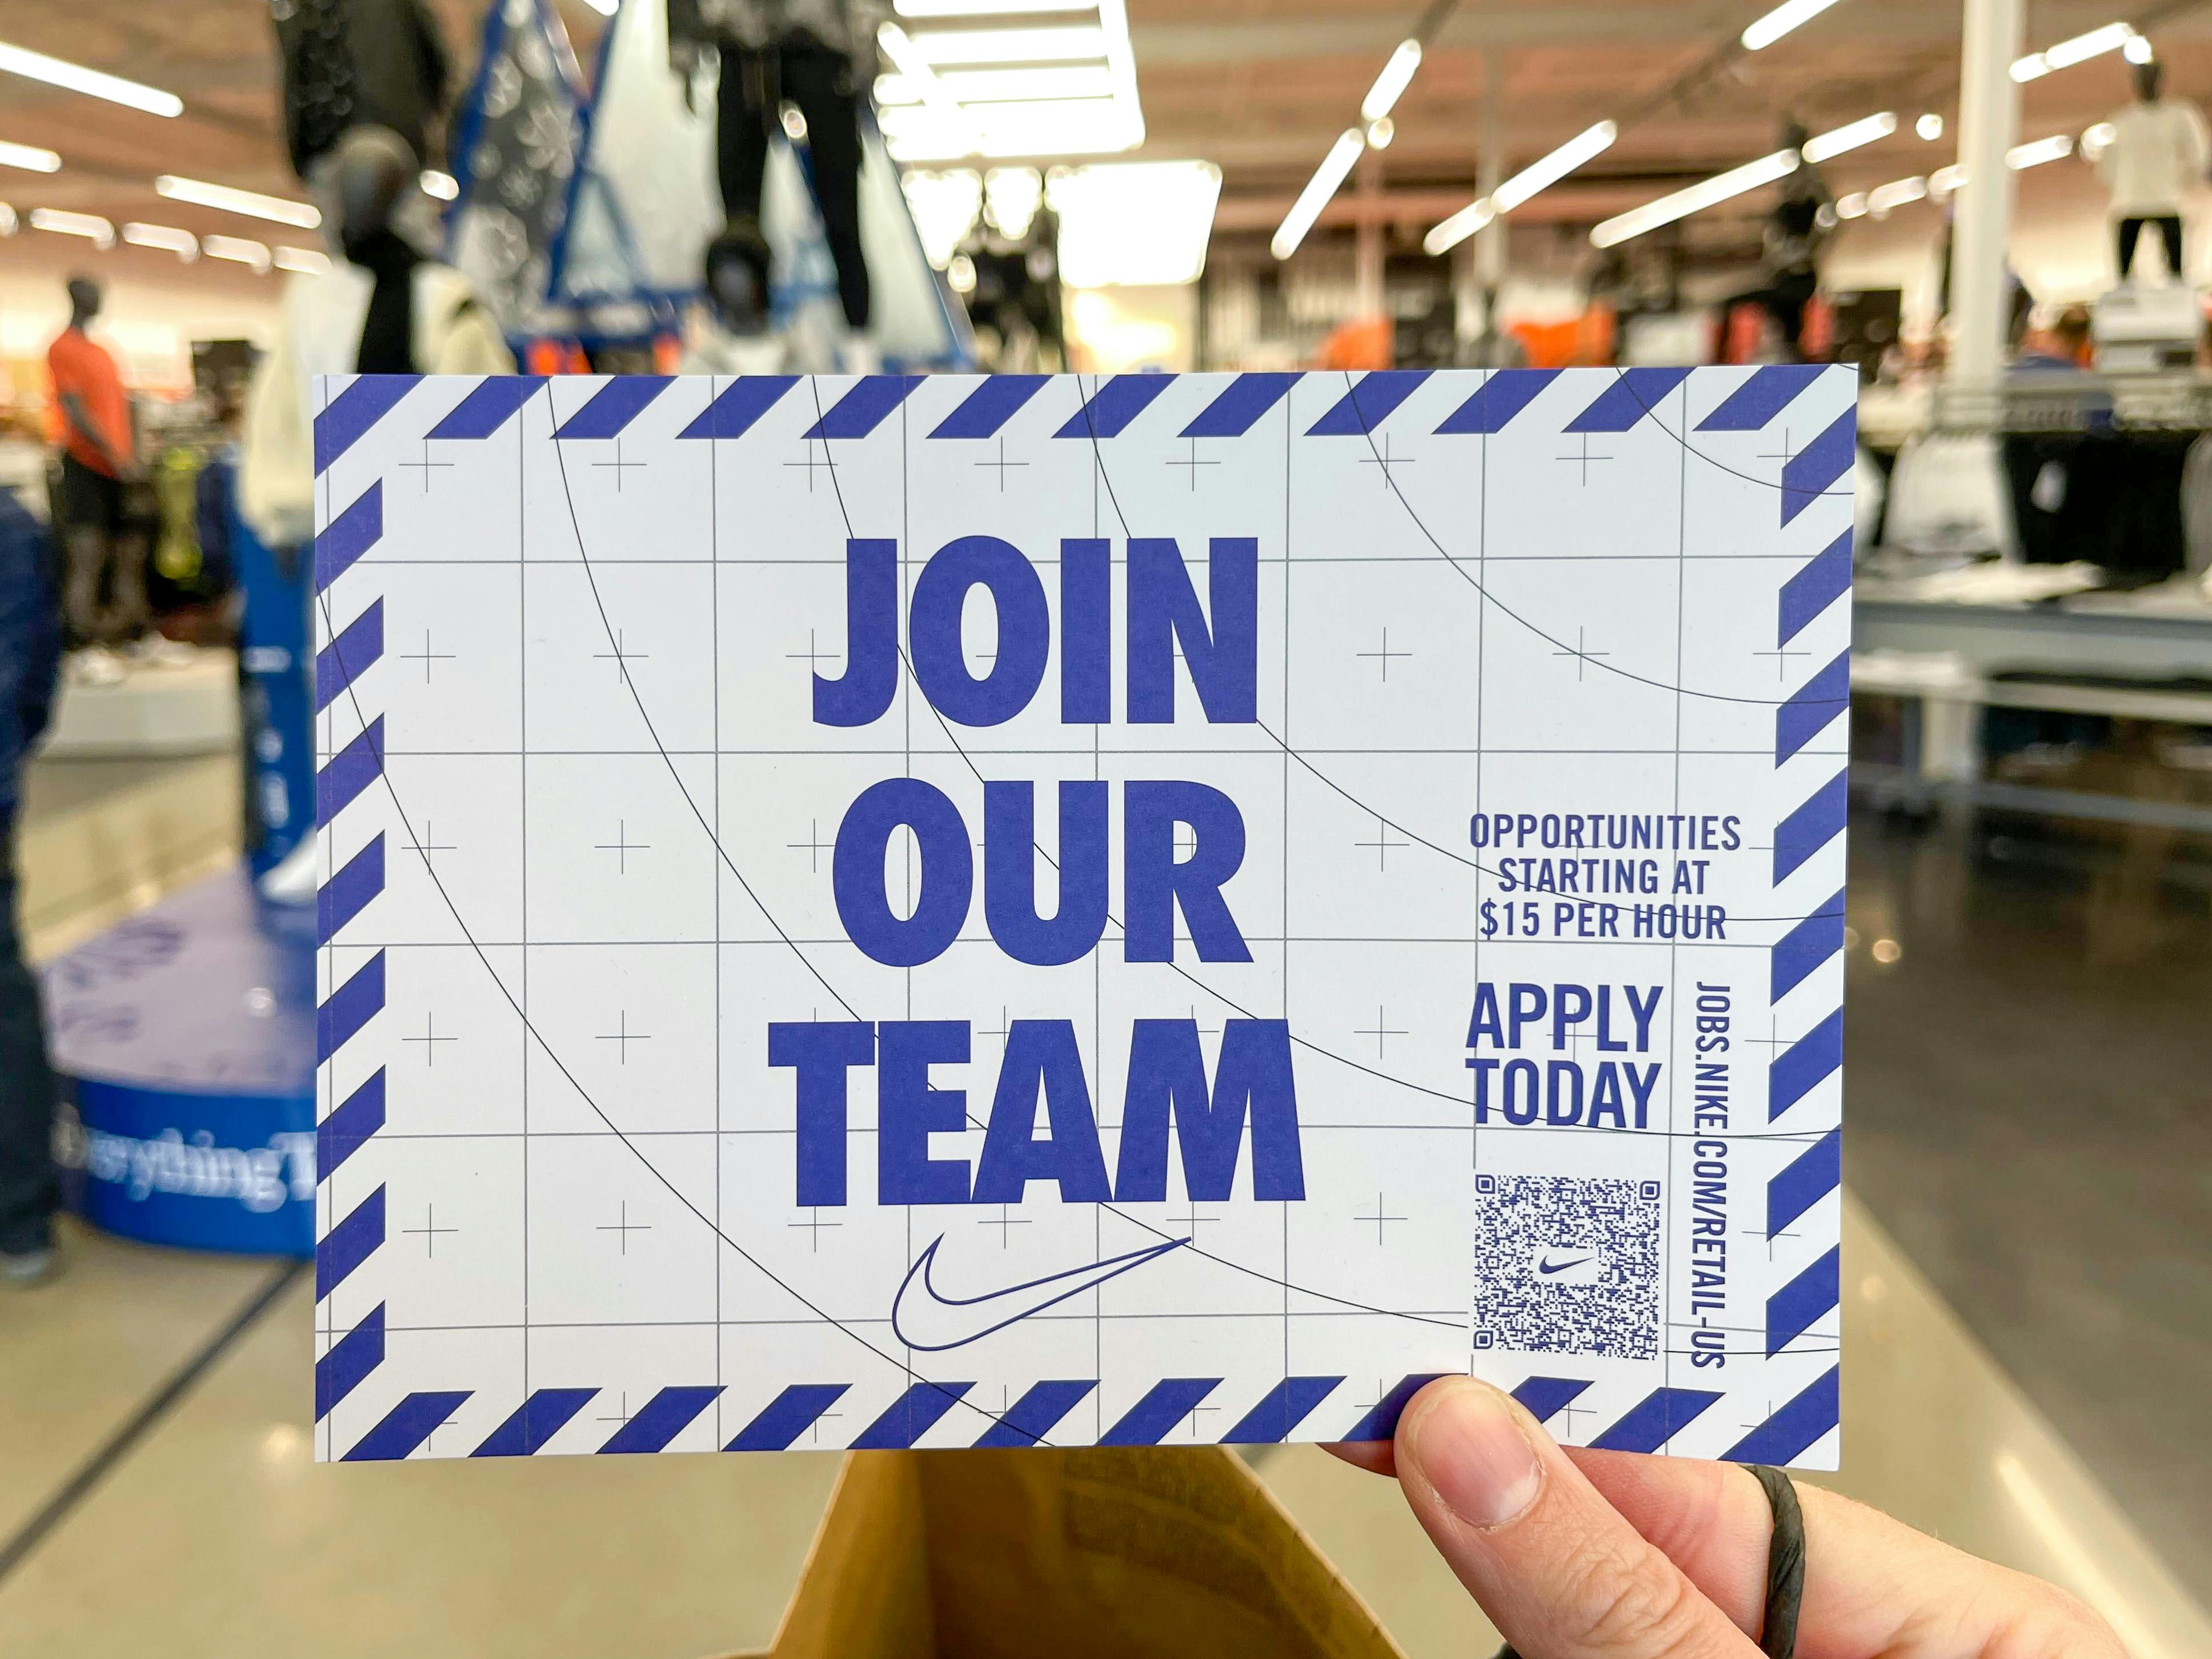 An information card for applying to work for Nike being held up in a Nike store. The card says, "Join our team